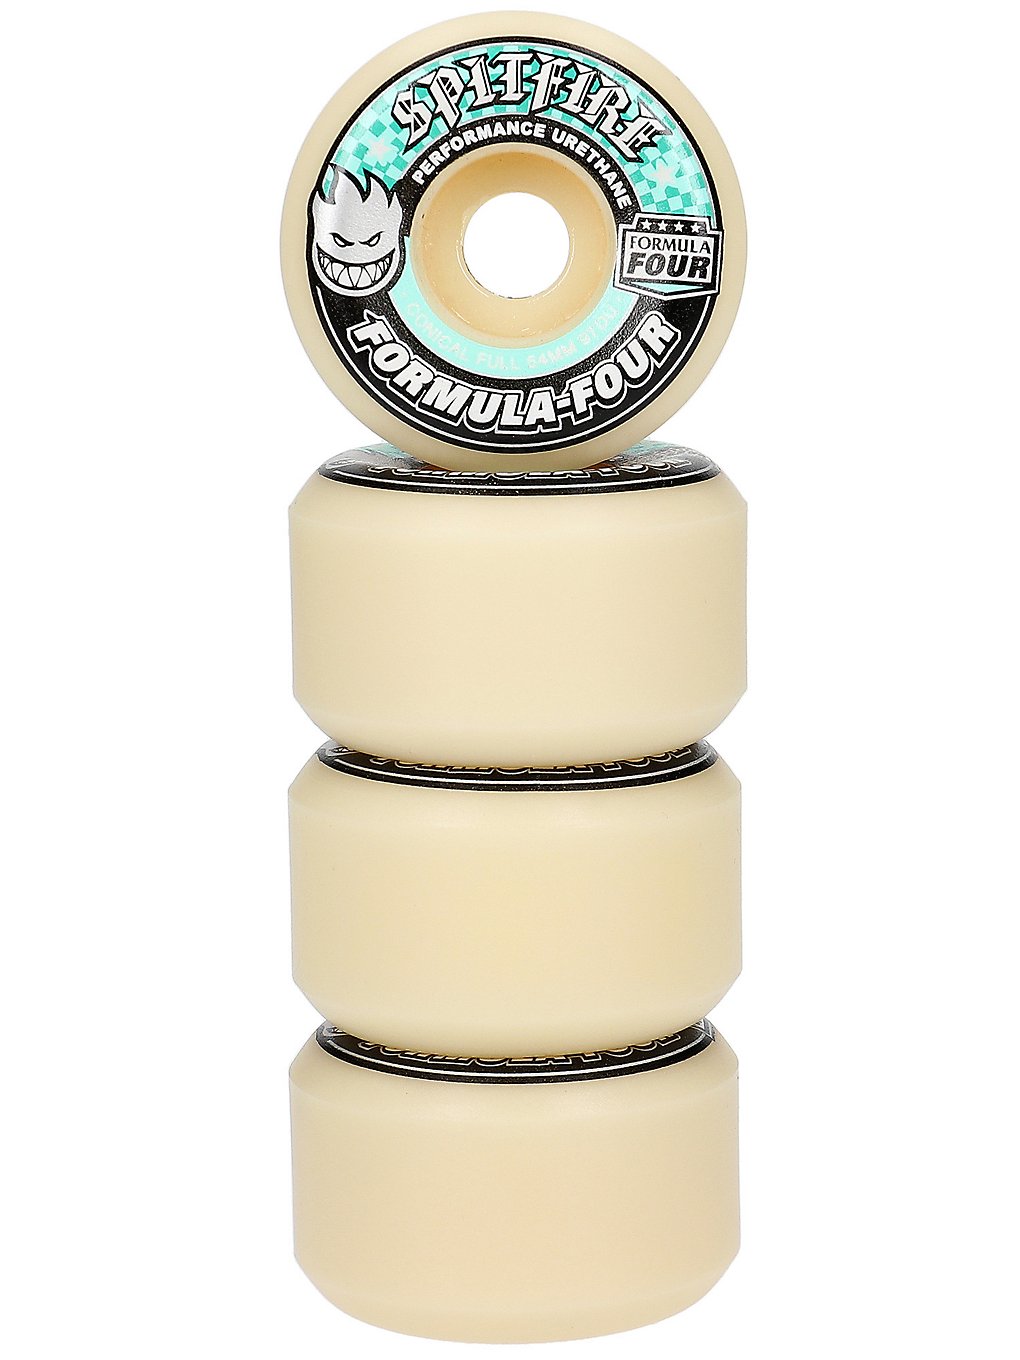 Spitfire F4 97 Conical Full 54mm Wheels natural